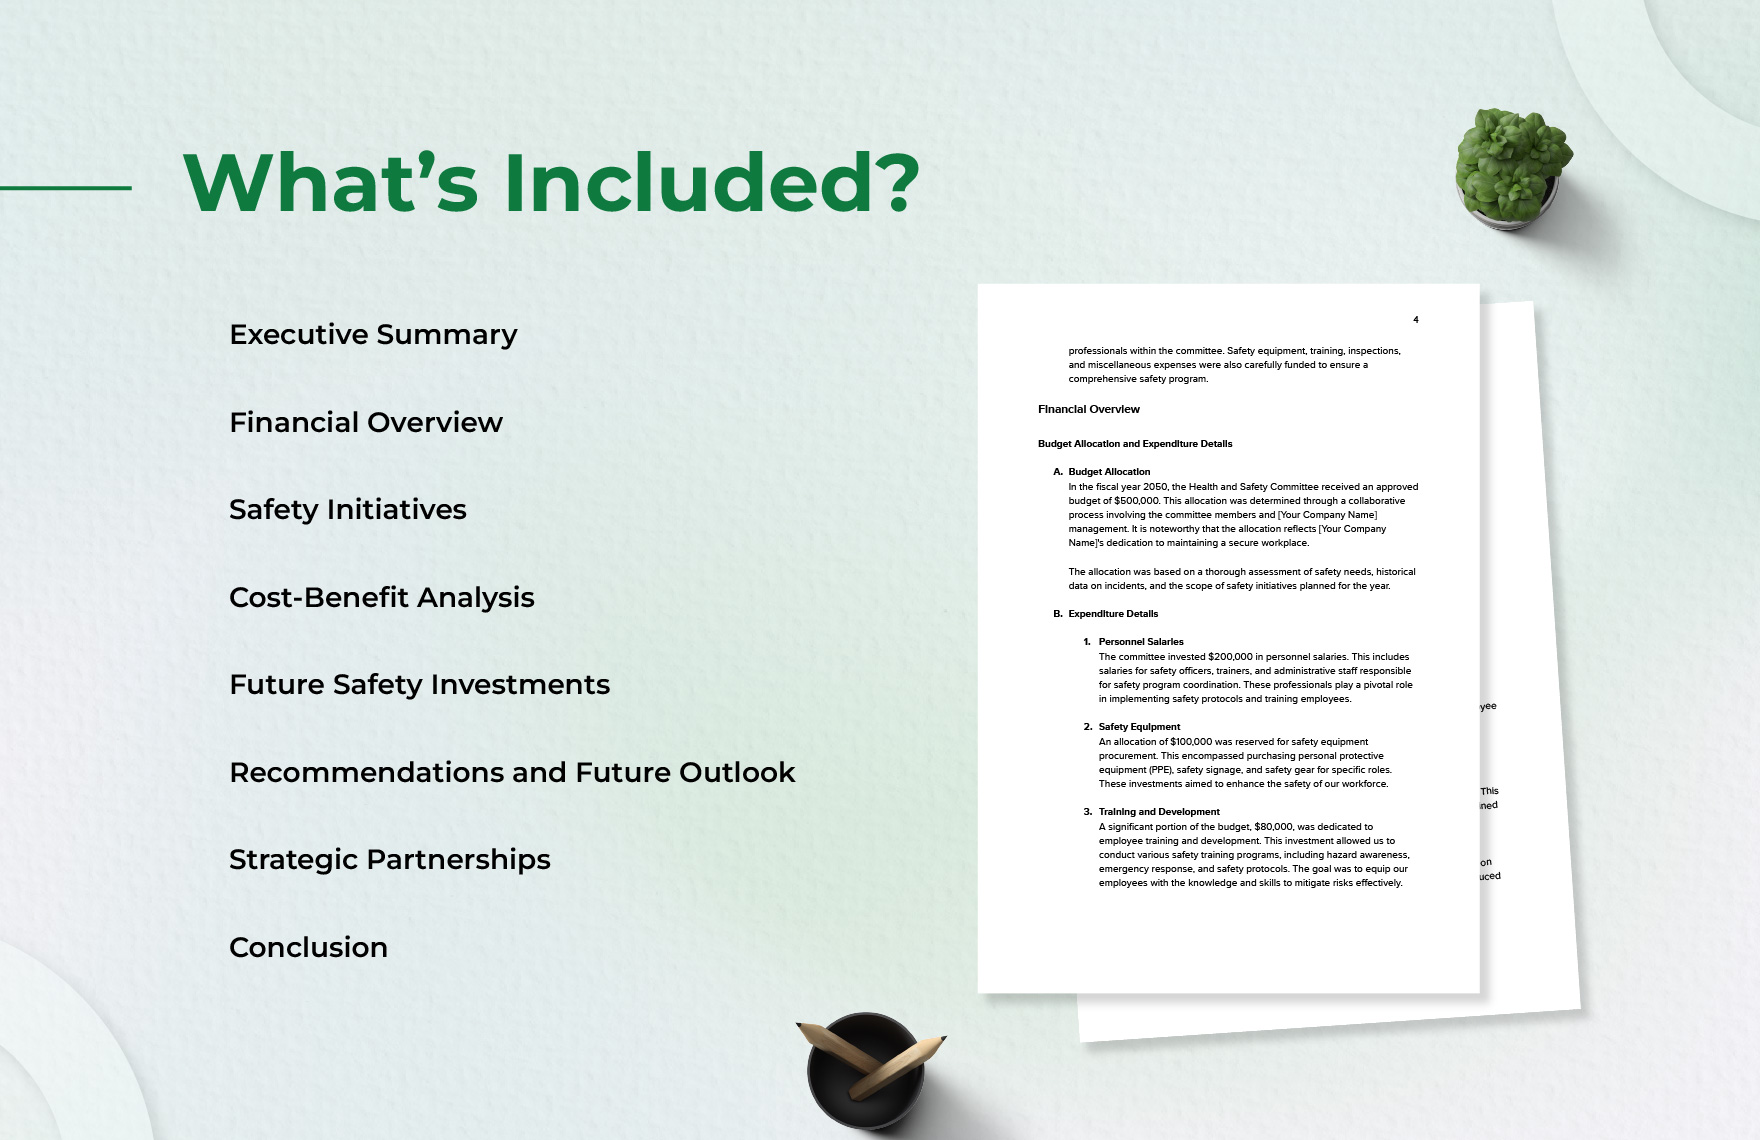 Health & Safety Committee Financial Analysis Template